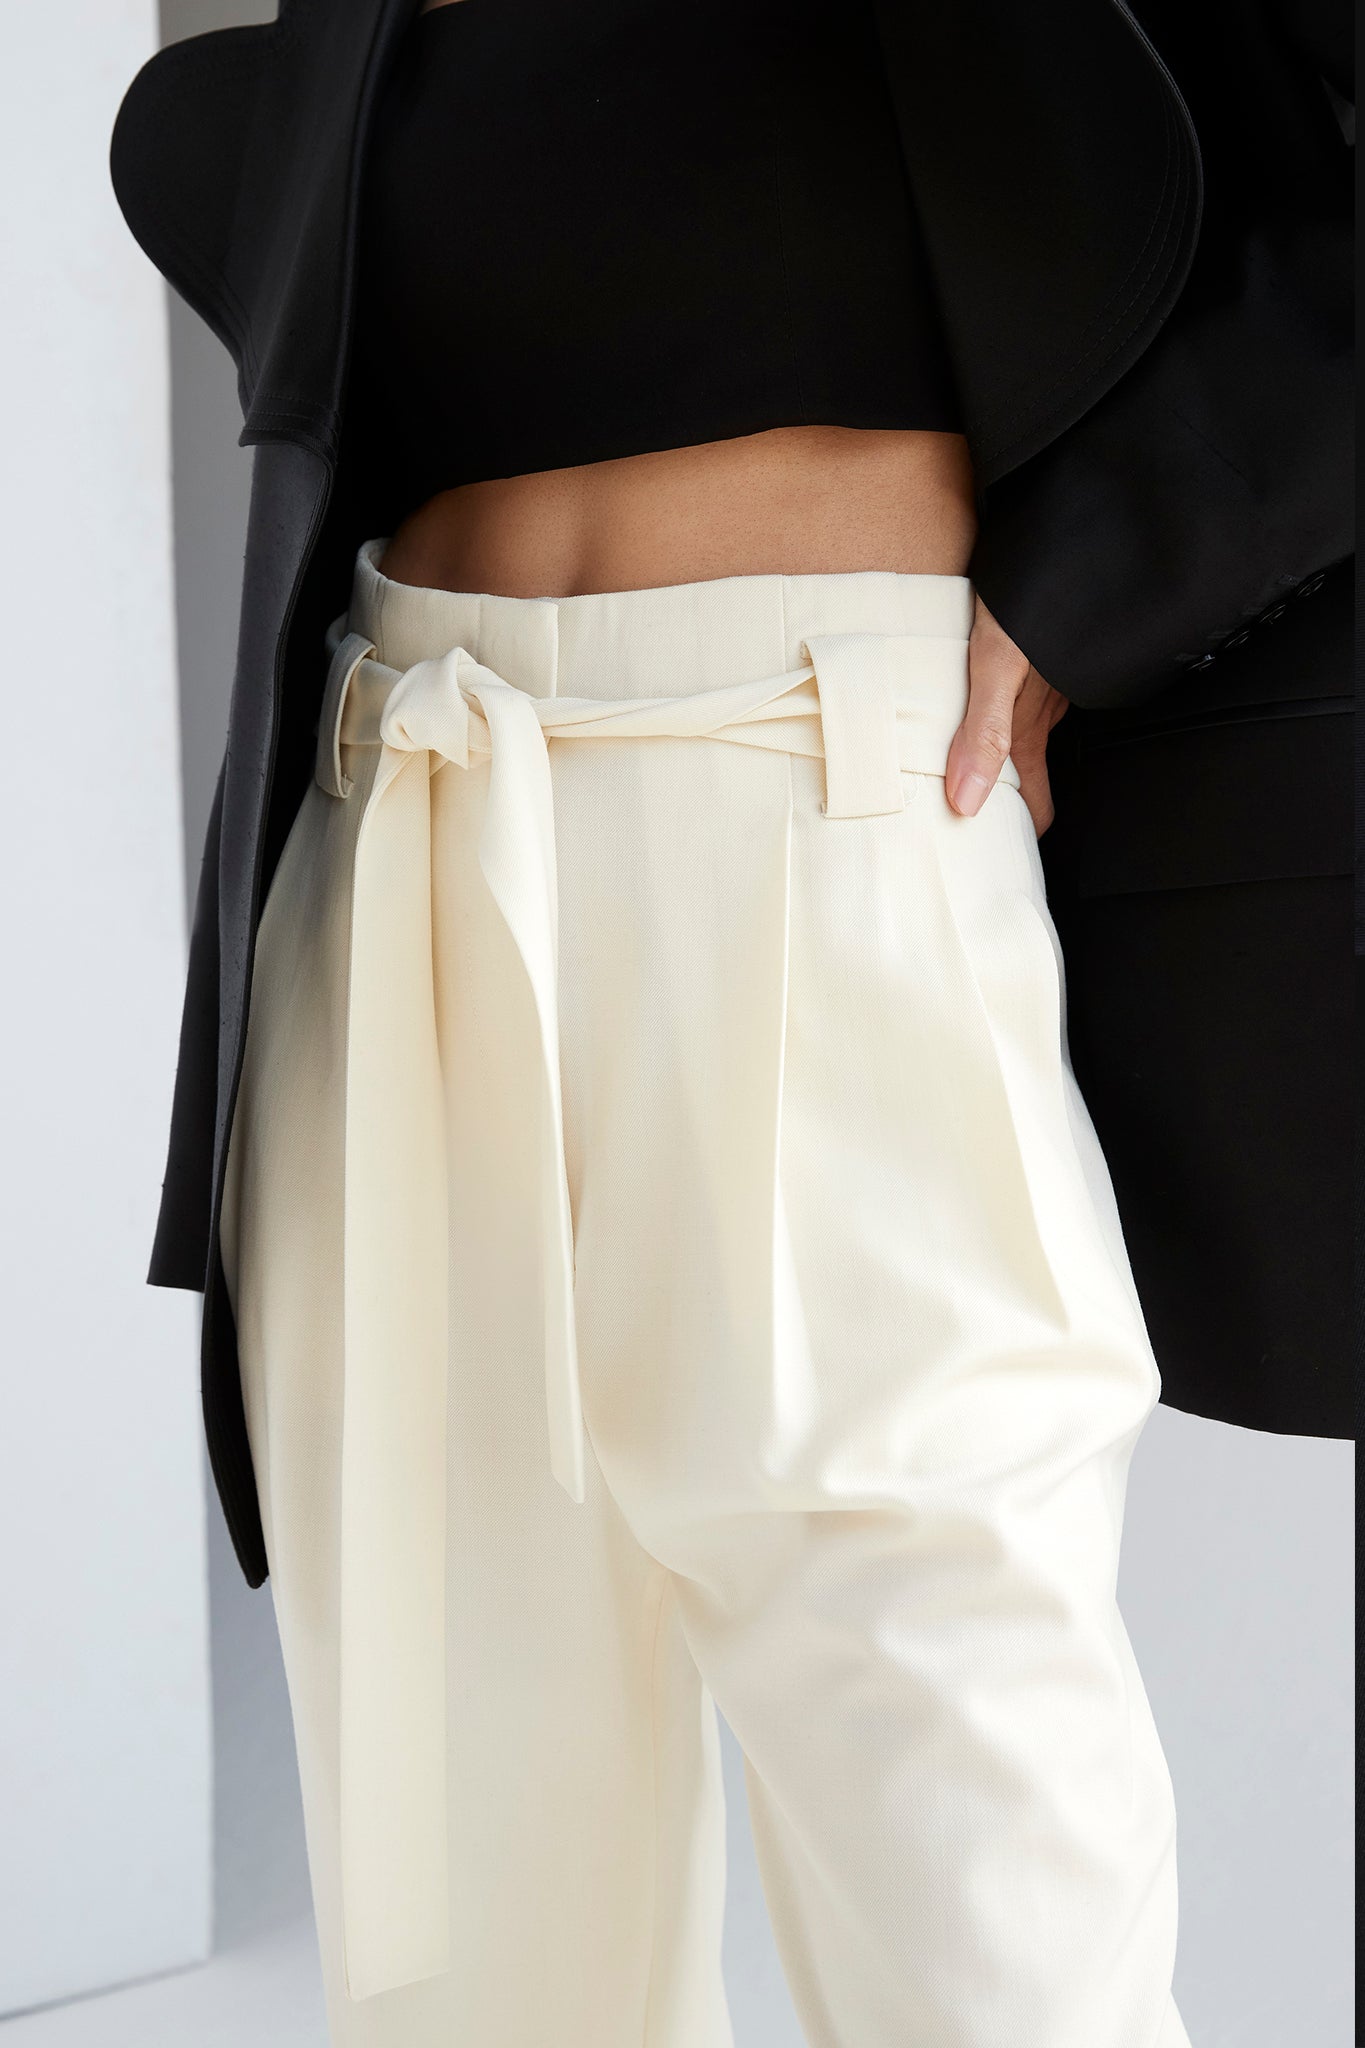 BRYNN PLEATED PANT - BONE (ONLINE ONLY) - White Cherry Boutique